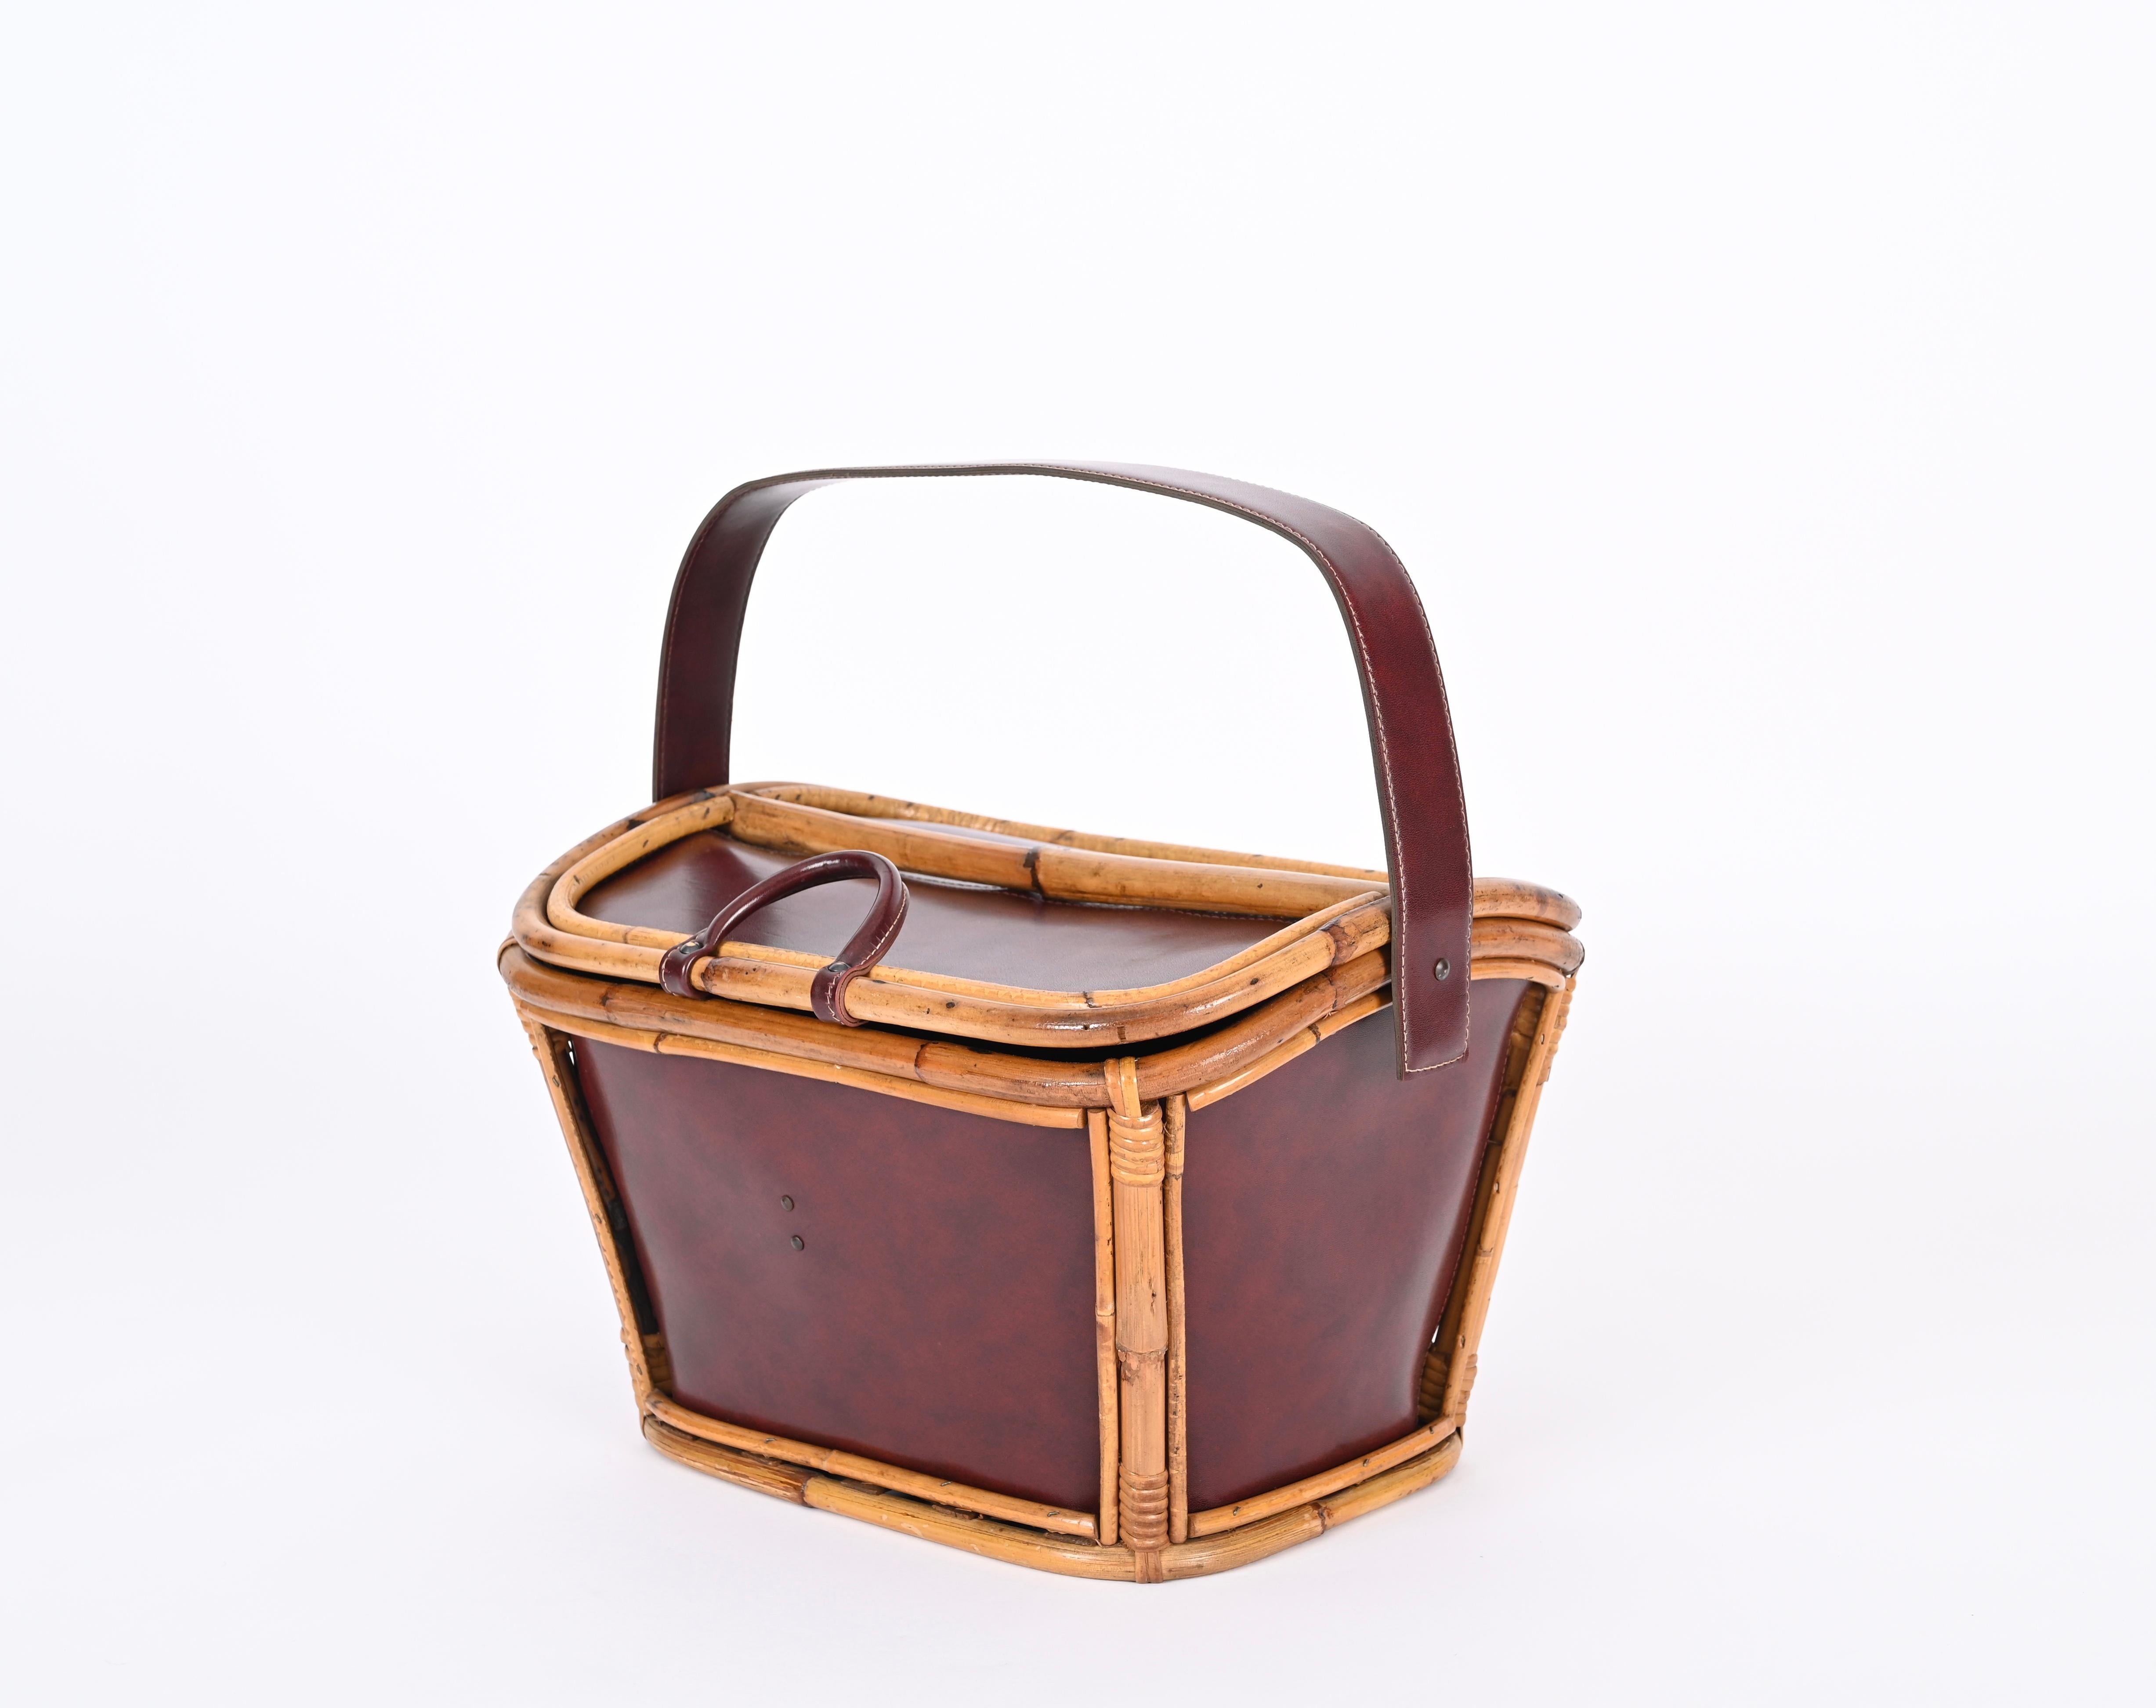 Stunning Mid-Century decorative basket bag fully made in curved rattan, bamboo, wicker and leather. This fantastic piece was made in Italy during the 1960s.

This astonishing item has a rectangular structure in curved rattan and hand-woven wicker